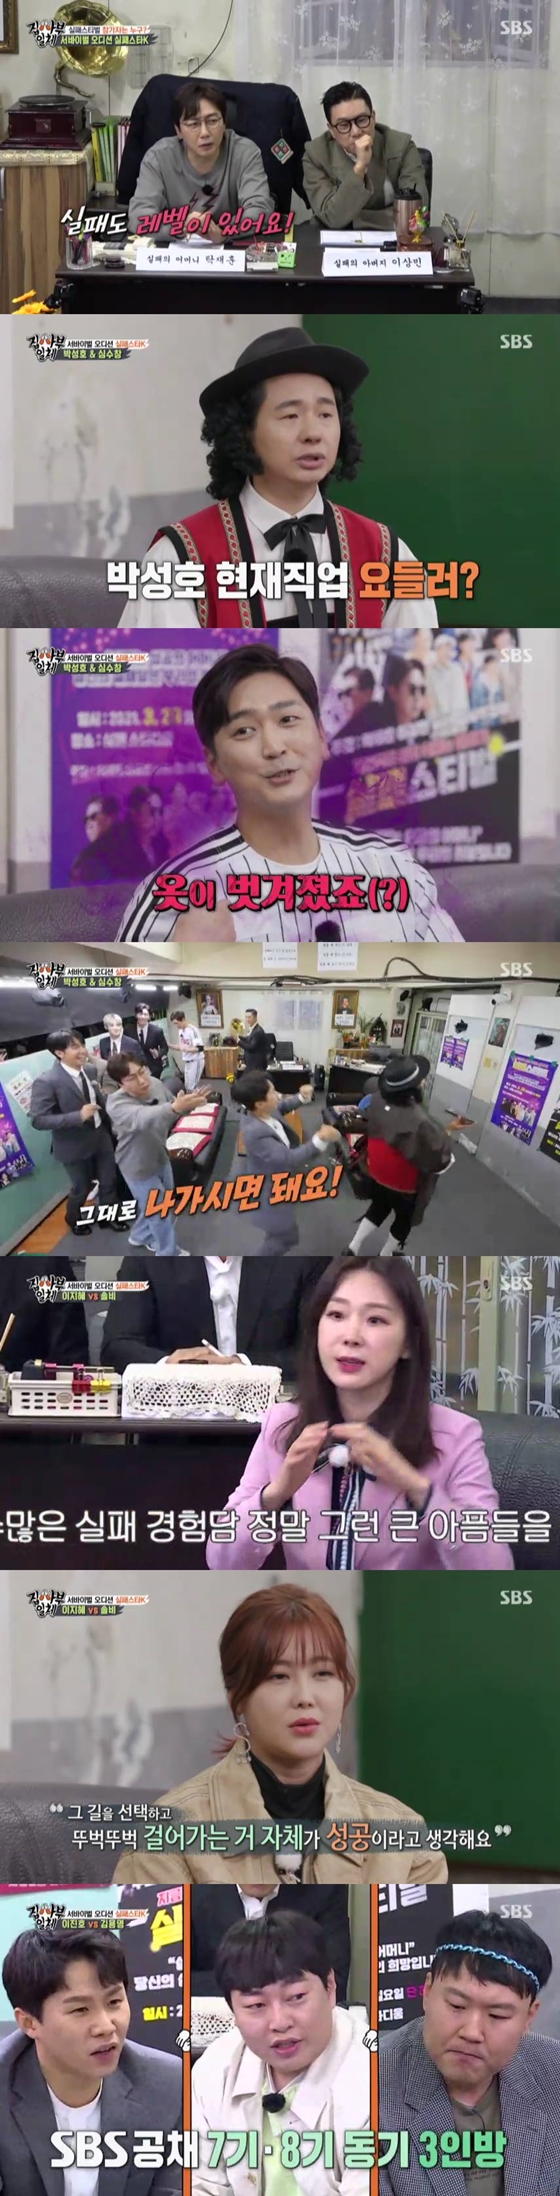 According to Nielsen Korea, a TV viewer rating research company on the 22nd, SBS entertainment program All The Butlers, which was broadcast on the 21st, recorded TV viewer ratings of 4.9% and 6.8% based on the metropolitan area households.Topic and competitiveness indicators, 2049 Target TV viewer ratings, hit 2.9 percent, while top TV viewer ratings per minute rose to 8.7 percent.On this day, members, Master Tak Jae-hun and Lee Sang-min met with Failure people to select the so-called Failure Star Top 5 to participate in Failure Festival.Failure Festival is a festival that supports and supports Failure. It is a large project designed to reinterpret the meaning of Failure.First, baseball player Shim Soo-chang and comedian Park Sung-ho appeared. Park Sung-ho said, I tasted Failure enough.I have no place to back down, said Park Sung-ho, who is currently working as a yodeler, saying, My dream is to enter Switzerland or Europe.But I can not go abroad because of Corona. Shim Soo-chang then confessed: Its not retirement, its clothes stripped off, its not retirement on its own, adding: Athletes usually do a grand retirement ceremony.I did not have a retirement ceremony, and my friends gave me a retirement ceremony at a small house. His application was filled with various Failures such as speech attention, entertainment, reconciliation with catcher Jo In-sung, and health control Failure, which led to laughs.Next came Lee Ji-hye and Solbi, who said, As soon as I heard about Failure Festival, I really wanted to support it.I have a story that grew up from Failure, Solbi said, referring to the reason the group Typhoon was Failure: Because of the company.There may be my cause, but then the company went bankrupt. Asked about the dismantling of the shop, Lee Ji-hye said, I think this is what I was involved in.Who will blame you? He said, It is because of Seo Ji-young. He said his real name and laughed. Lee Ji-hye immediately added, It was fun and joked. They also spoke on the phone with the applicant who sent the Failure story.In the story of Failure, who has been an unknown actor for seven years, Solbi said, I always have a gaze around me, Why do you do art?I do not know why I keep going on an opaque and lonely road, but I think it is a success to choose the path and walk. Solbi said, Everything is uncertain and uncertain, but if I love it and my reasons are clear, I think my life has succeeded even if it is not a social success.The last applicants were comedians Lee Jin-ho and Kim Yong-transparent.Kim Yong-transparent talked about the second plan Failure, hair thickness management Failure, and Lee Jin-ho recently made the scene into a laughing sea by telling Failure that he had Failure to talk on Radio Star.Lee Seung-gi declared, I will hold the Failure Festival in earnest. At the same time, someone shouted Who and interrupted the opening ceremony.On the other hand, in the preliminary video, it was noticed that one person who gives laughter and hope to 6,000 Failure people will be selected as Failure King.